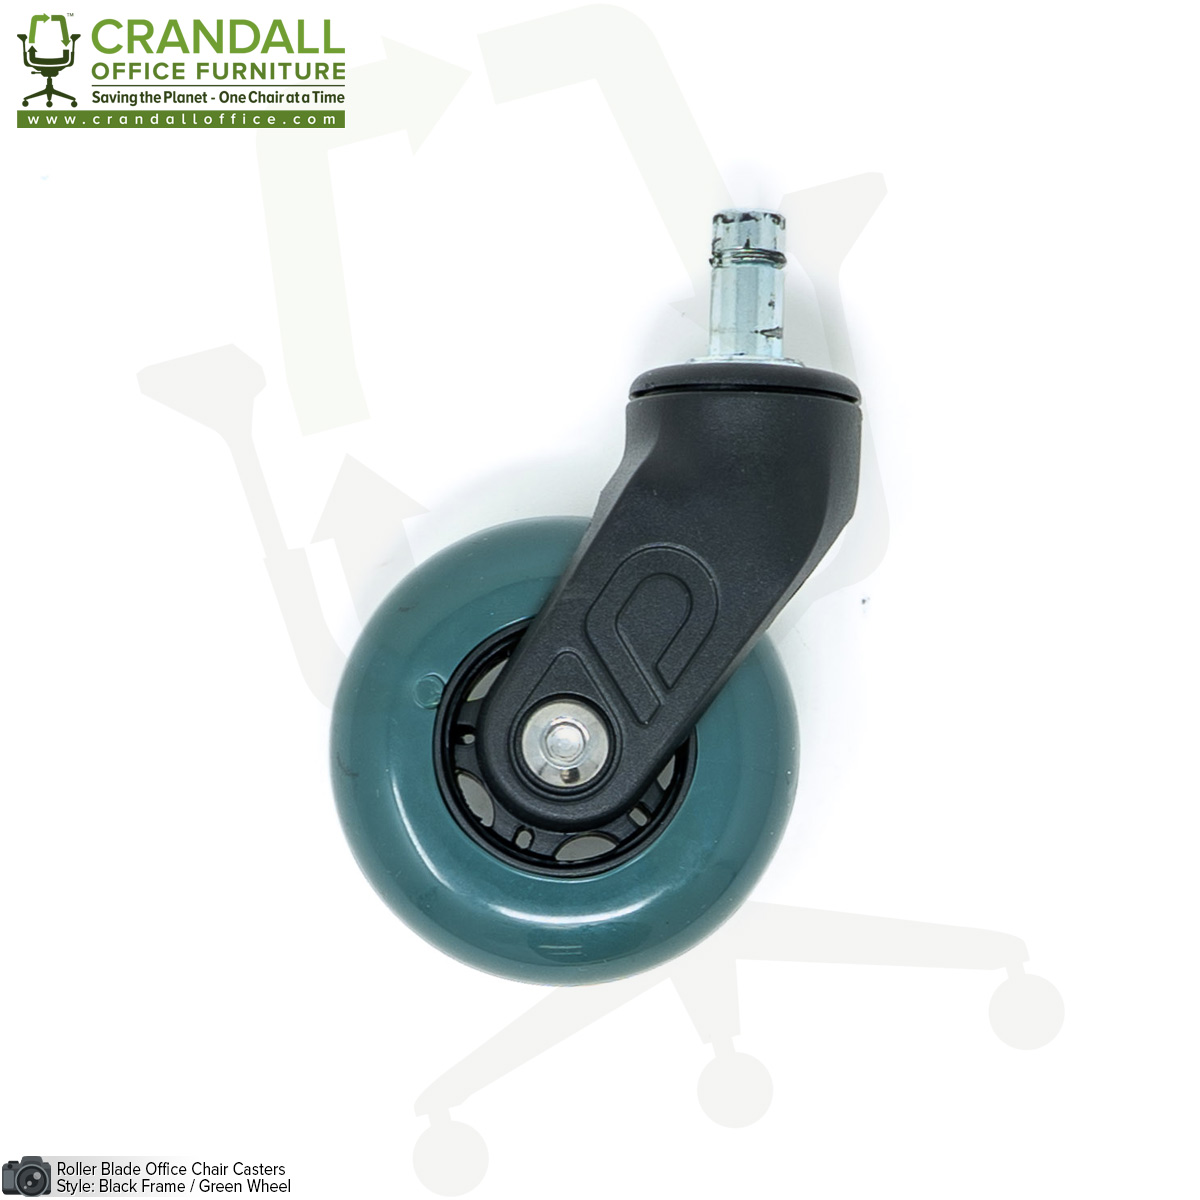 75mm (3 inch) Roller Blade Style Office Chair Casters - Crandall